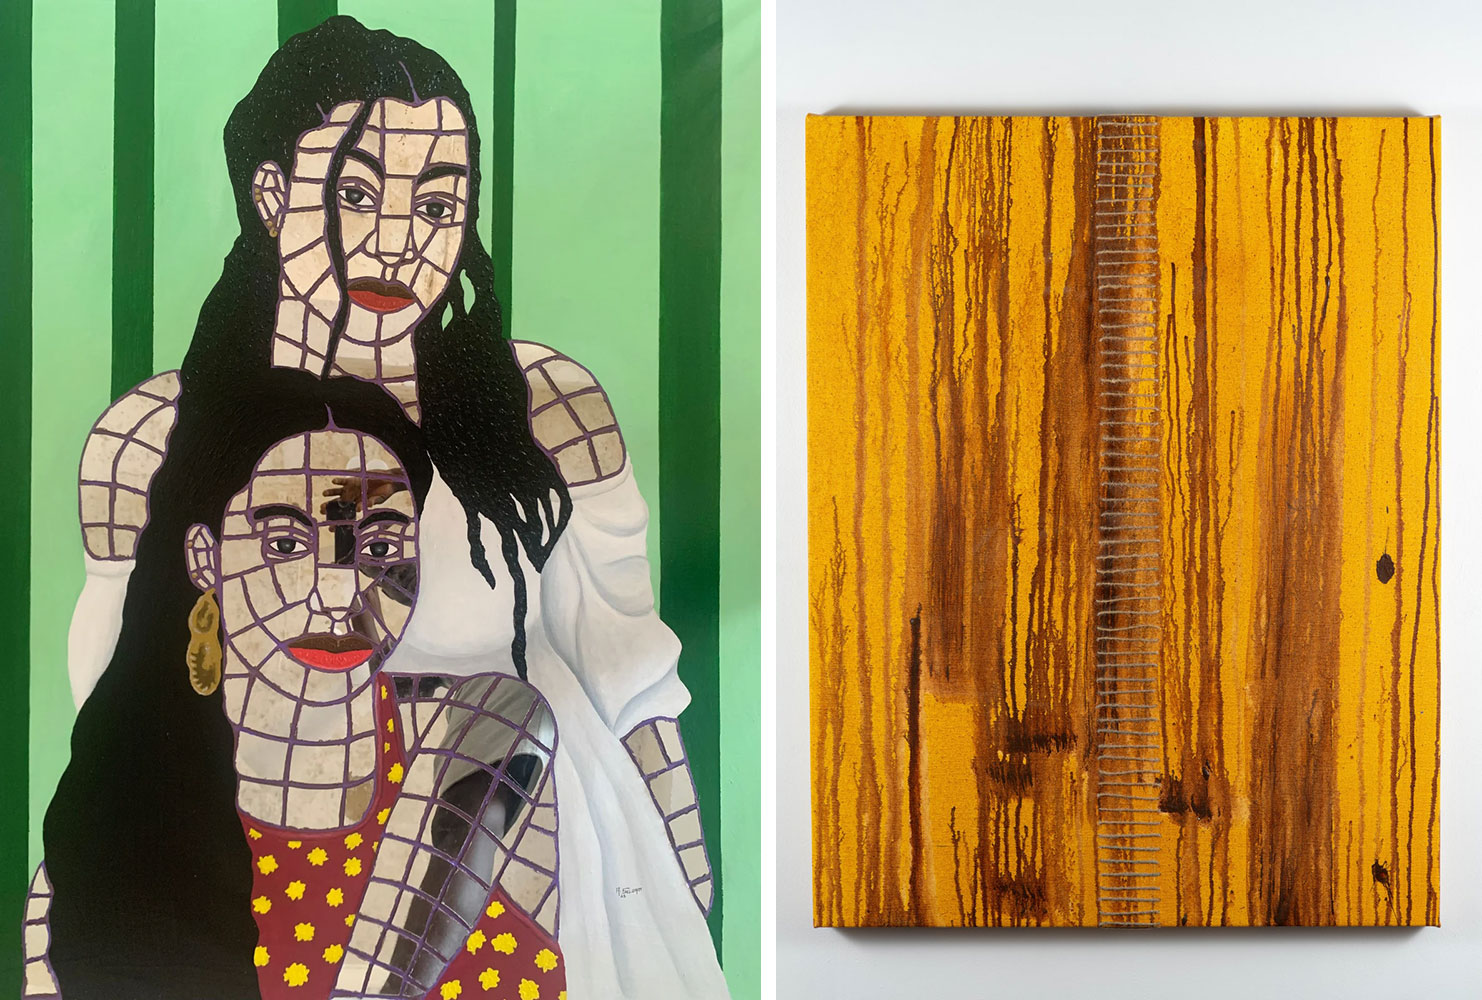 Left: Selorm Amekorfia, Sisters love, 2023, Broken mirror and acrylic on canvas, 51 1/2 x 46inches, © Selorm Amekorfia, Courtesy the artist and McLennon Pen Co. GalleryRight: Theresah Ankomah, Asaase Akwa, 2022, Acrylic paint and jute rope stitches on canvas, 36 x 28 inches, © Theresah Ankomah, Courtesy the artist and McLennon Pen Co. Gallery 